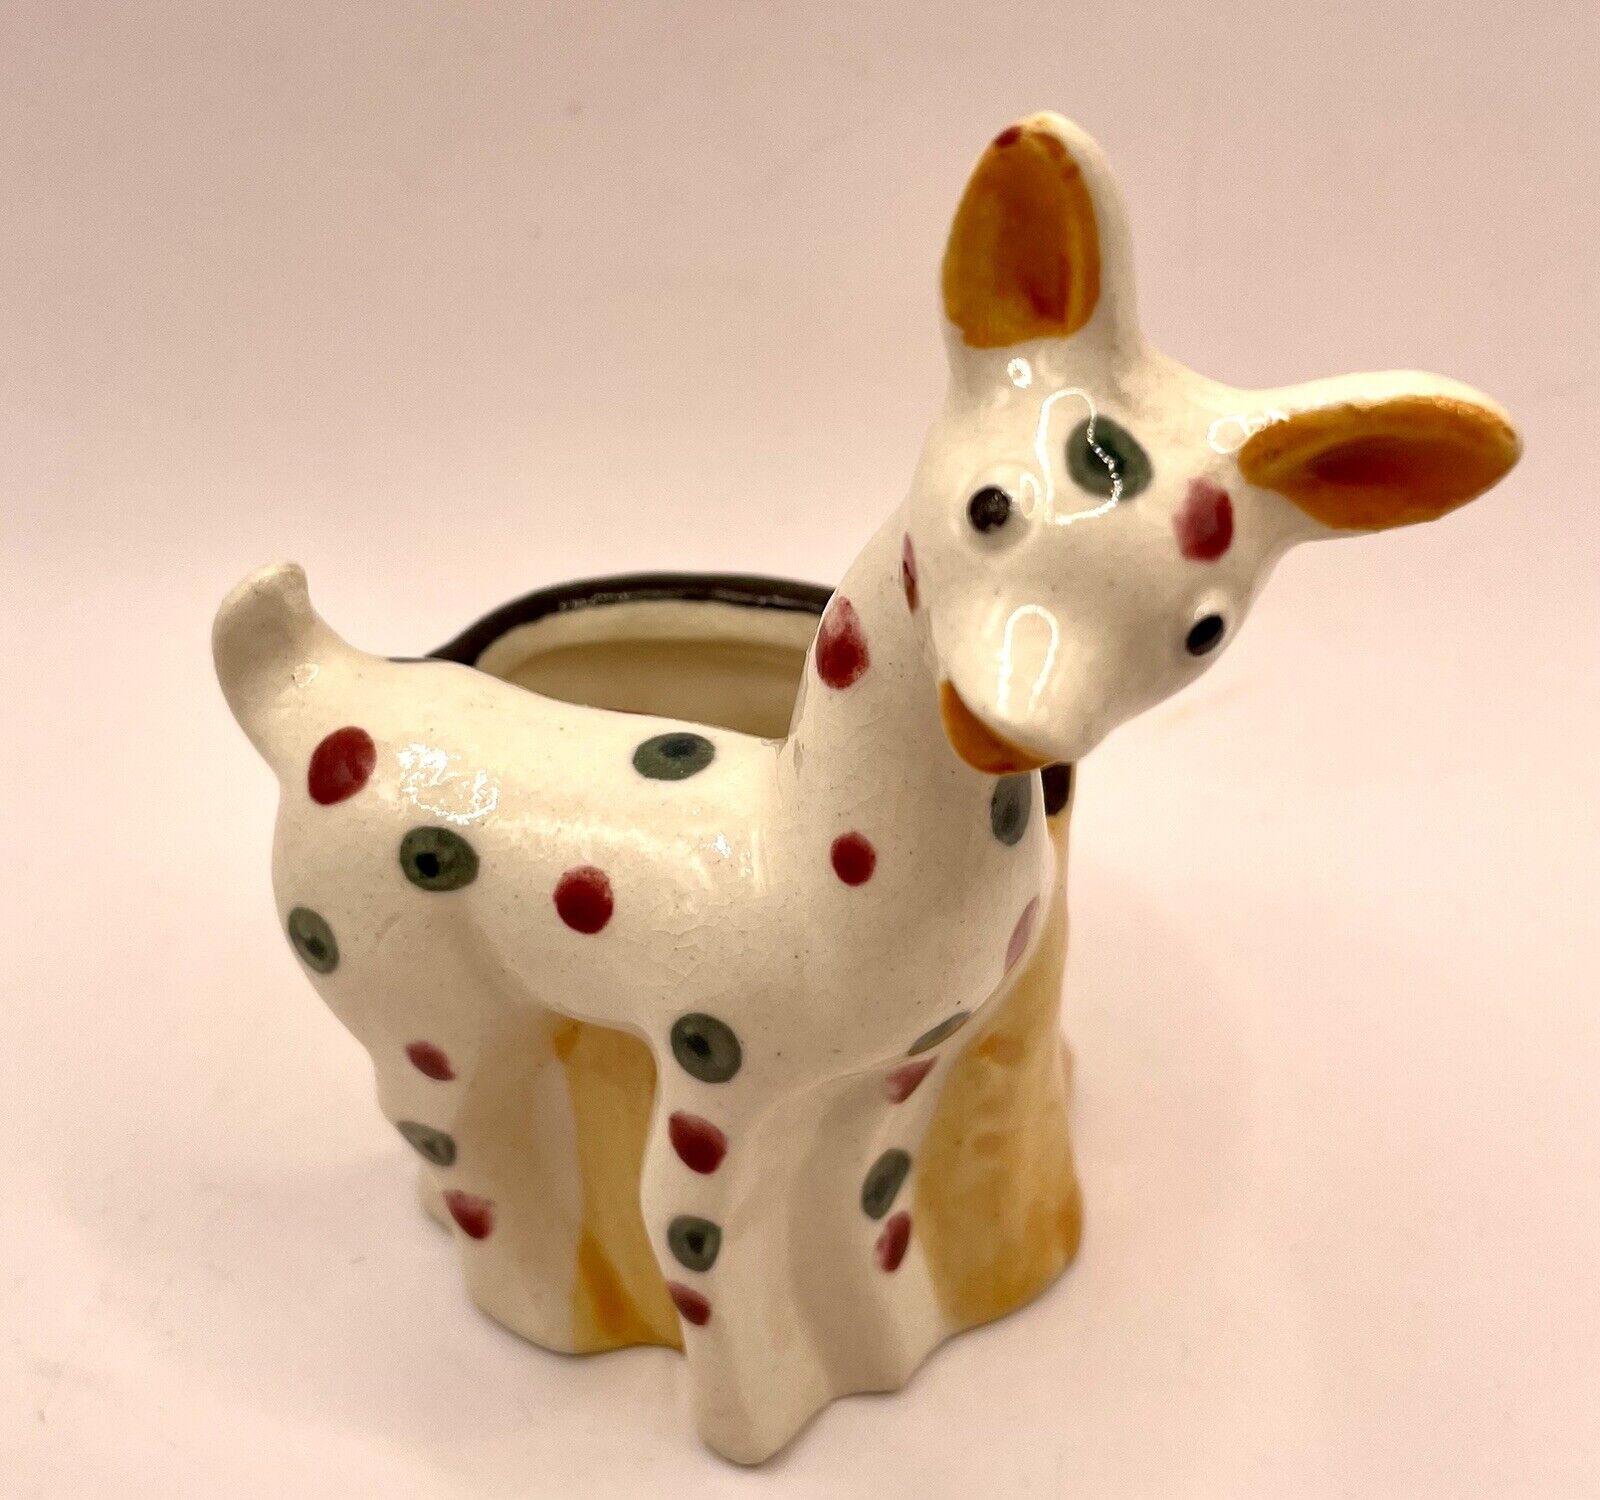 Vintage Spotted Giraffe Ceramic Small Planter or Jewelry Holder Polka Dots